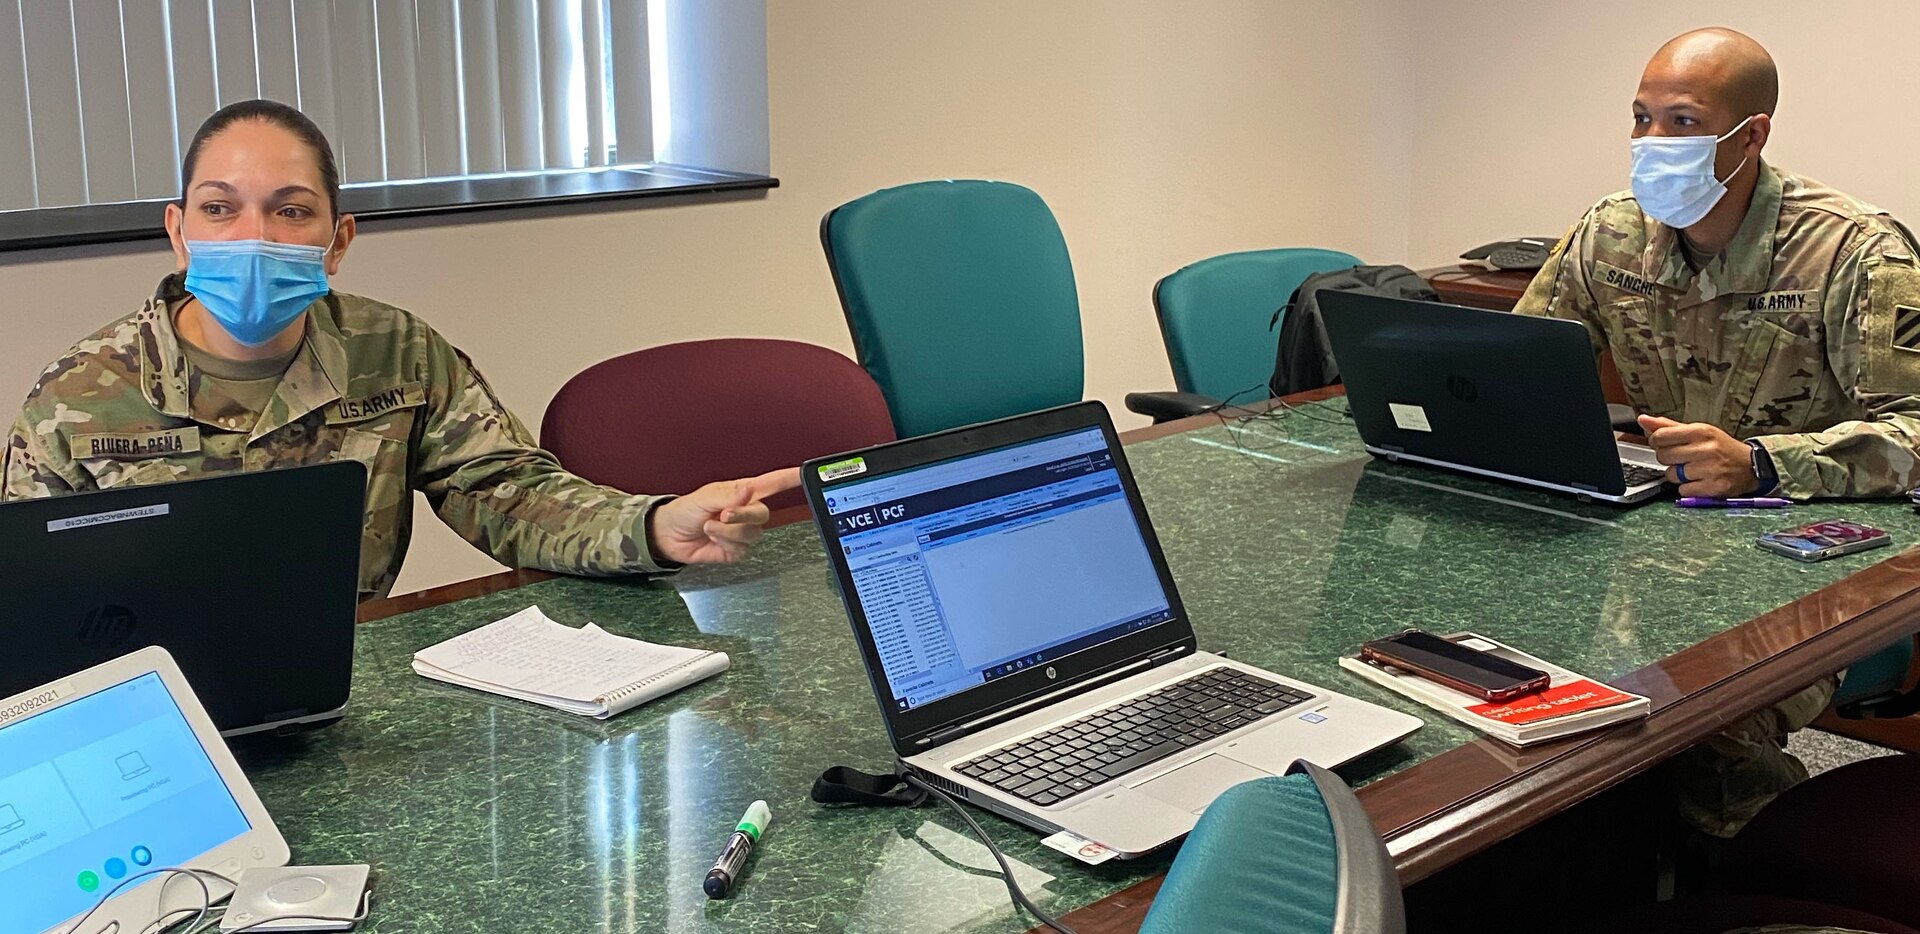 (From left) Sgt. 1st Class Mayda Rivera-Pena conducts training on the Virtual Contracting Enterprise-Paperless Contract Files acquisition system with Sgt. Tito Sanchez in preparation for a rotation in developmental assignments Nov. 9 at Fort Stewart, Georgia.